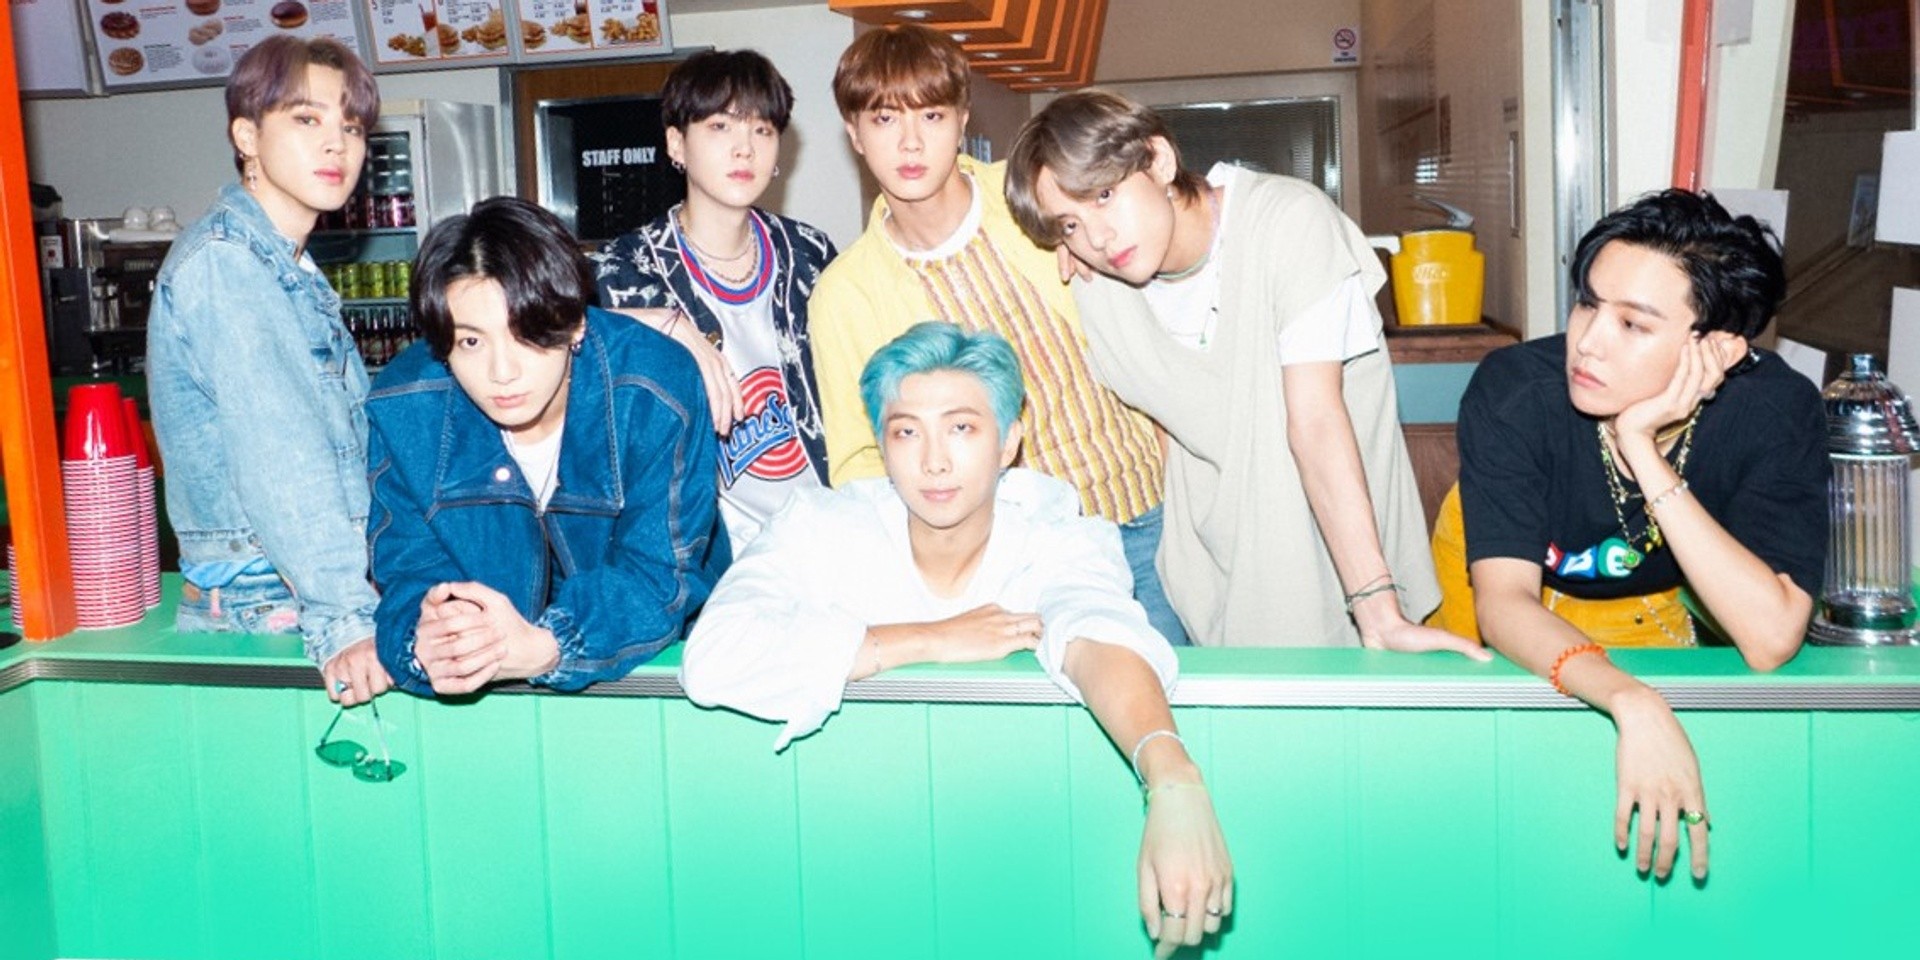 BTS' 'Dynamite' continues to set records as 3 million fans tuned in for "most simultaneous viewers for a music video on YouTube Premieres" 